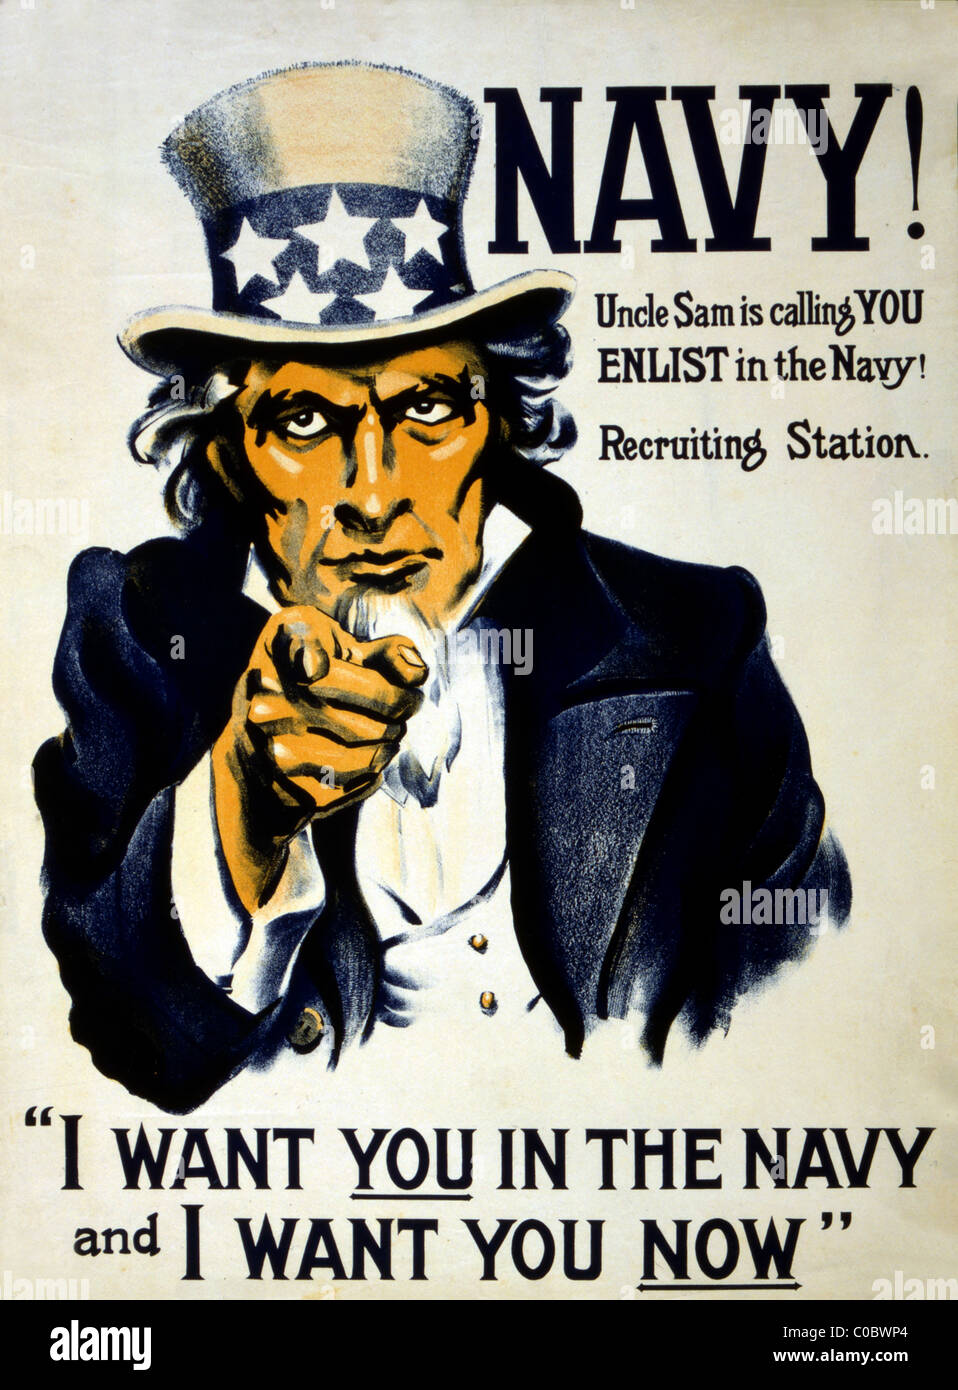 Uncle Sam recruitment poster for U.S. Navy. Navy! Uncle Sam is calling you--enlist in the Navy! Stock Photo